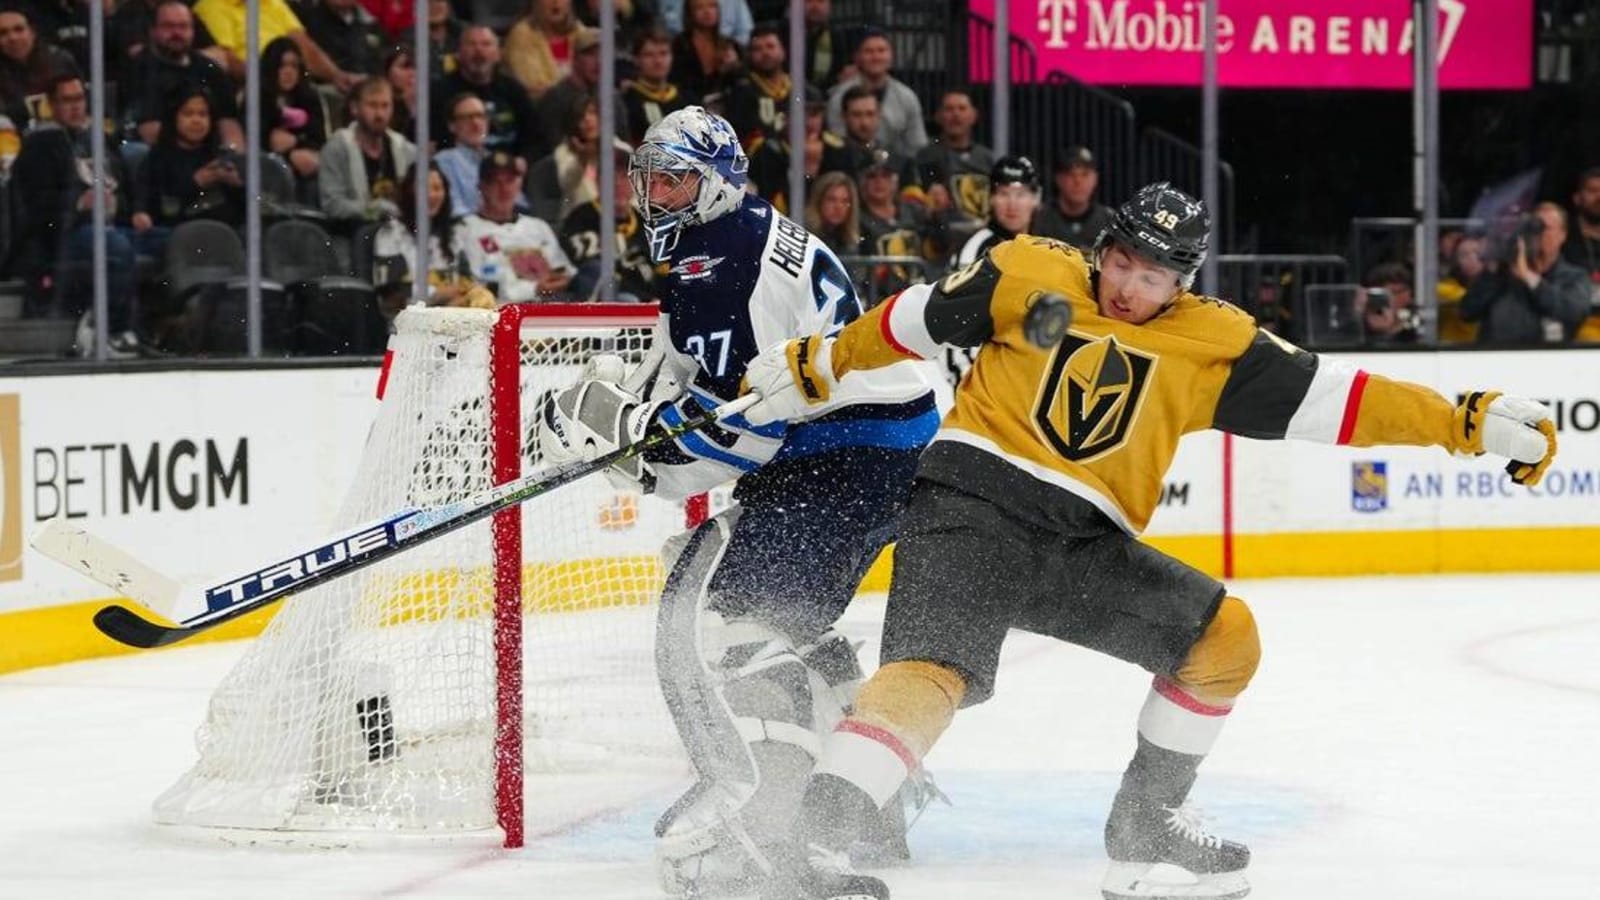 Winnipeg Jets at Vegas Golden Knights prediction, pick for 4/20: Knights calm heading into Game 2